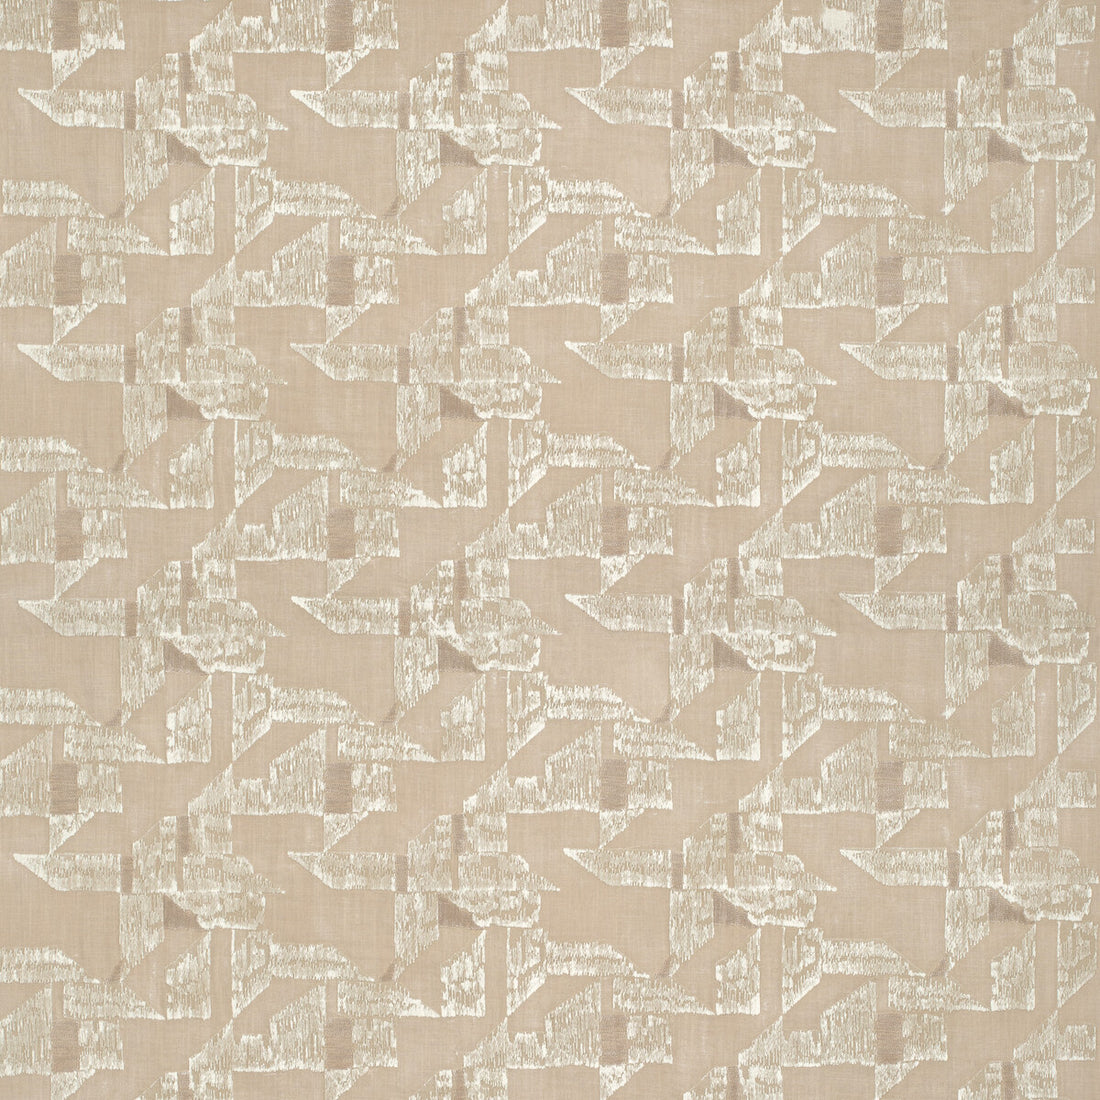 Himeji fabric in powder color - pattern 35892.16.0 - by Kravet Couture in the Linherr Hollingsworth Boheme II collection